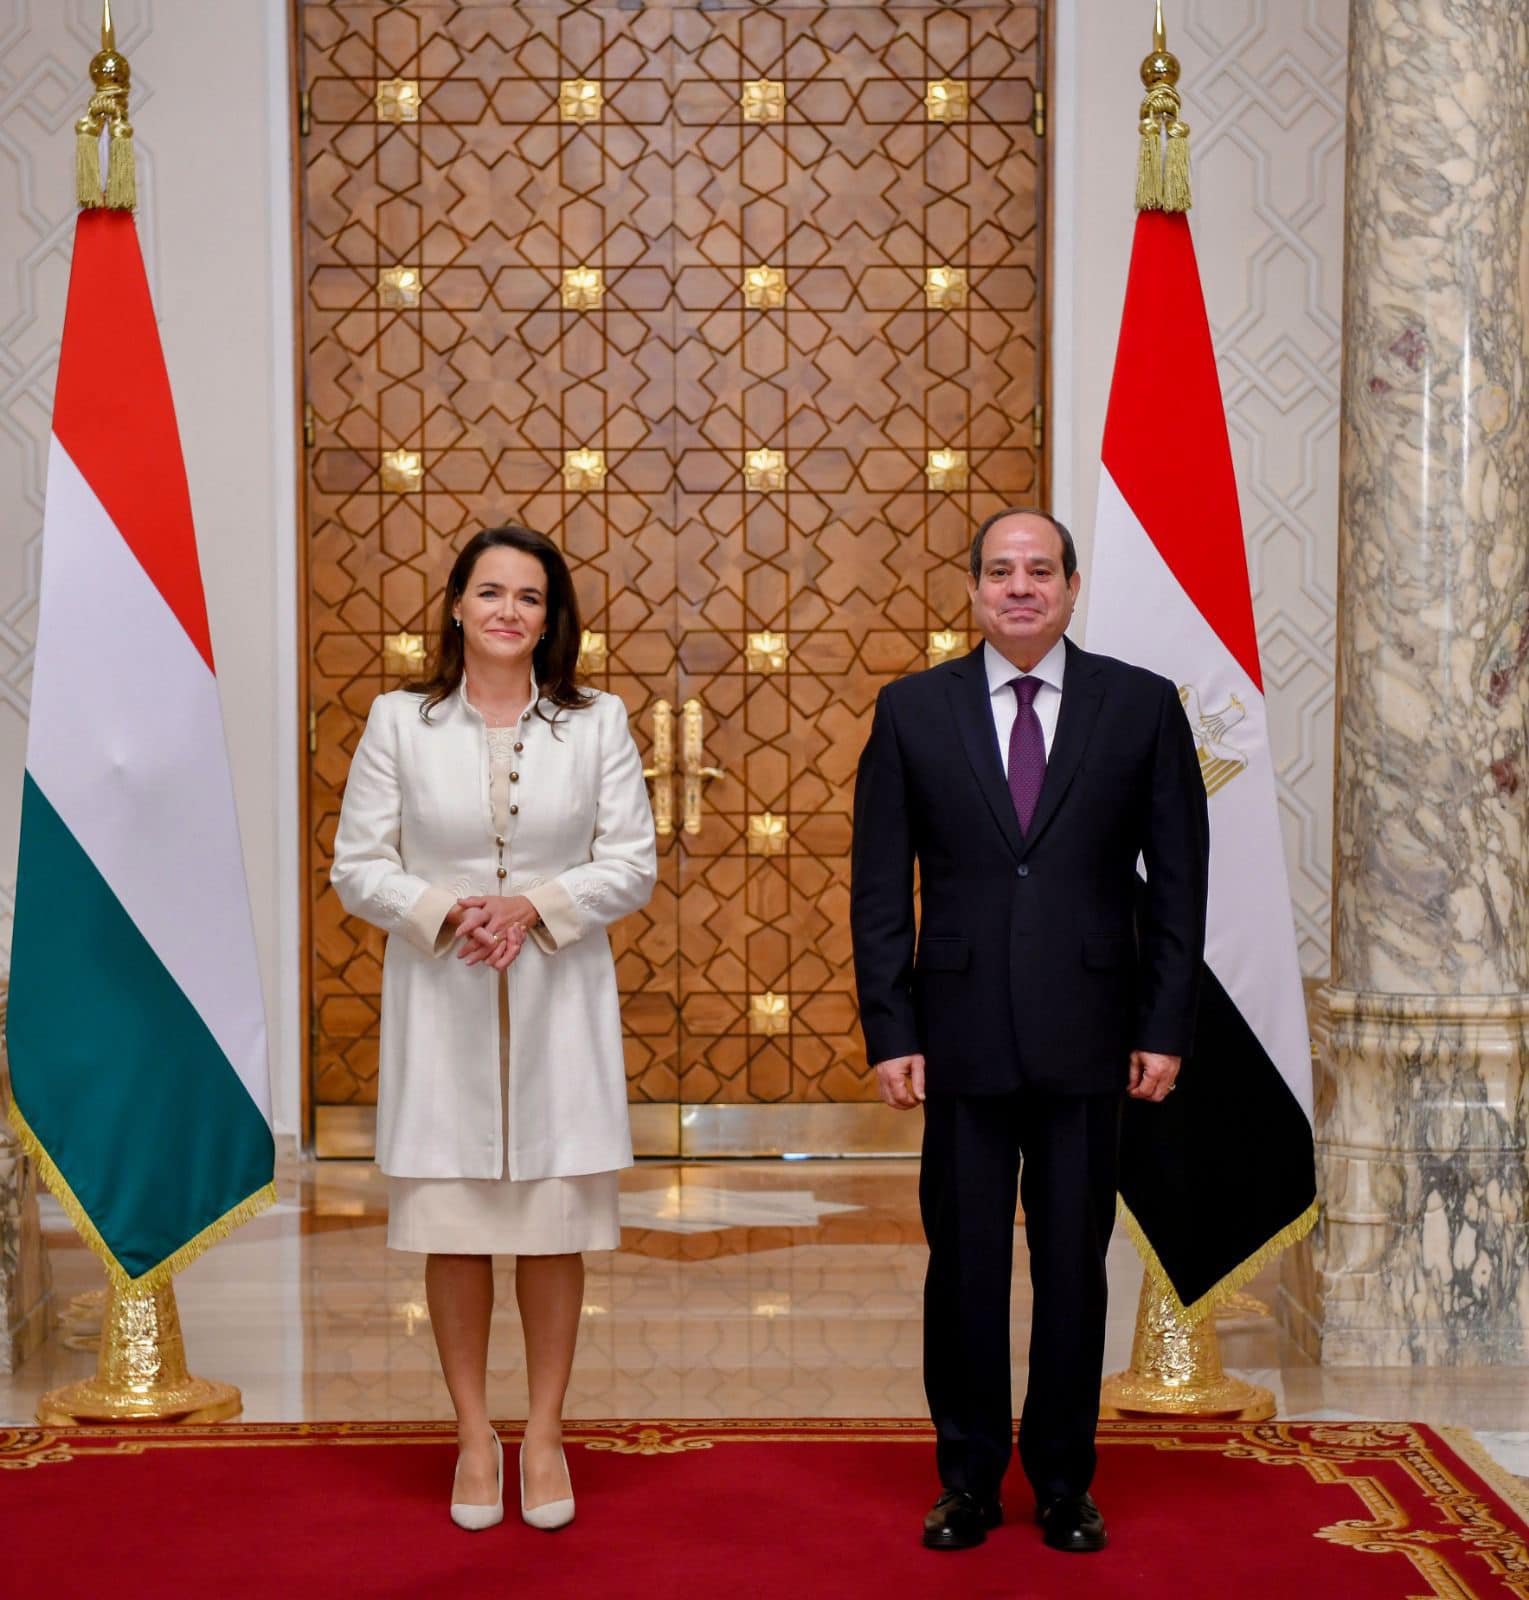 President Sisi meets with President of Hungary to discuss Egyptian efforts in the Gaza Strip.